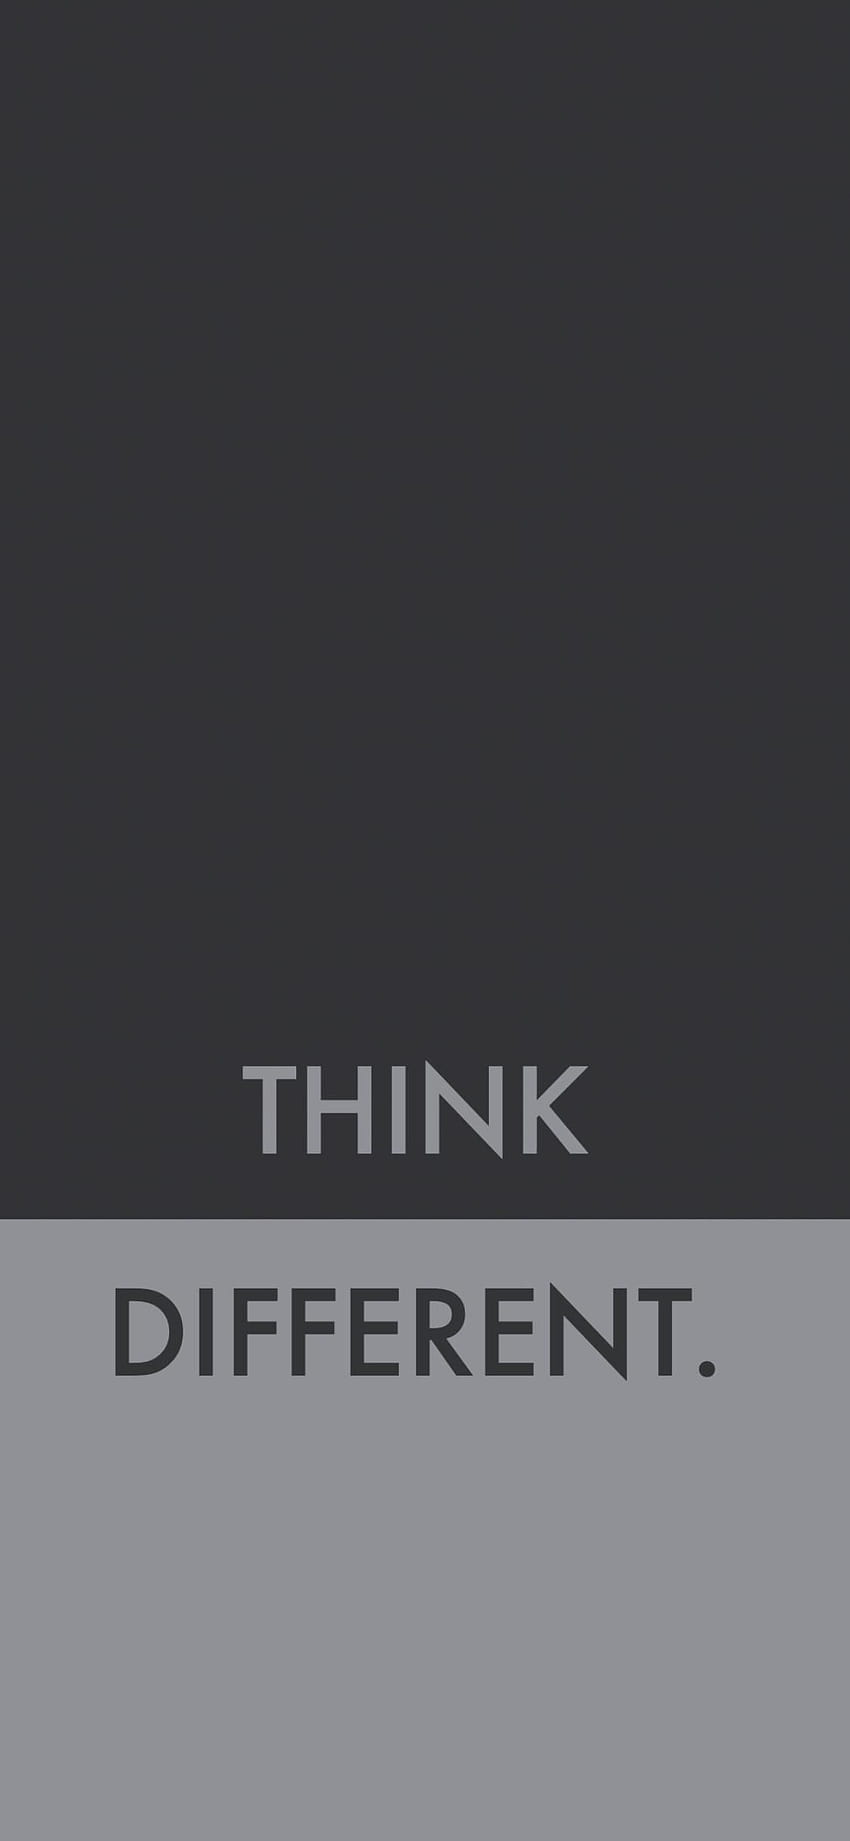 Think Different For Iphone、iphone は違うと思う HD電話の壁紙